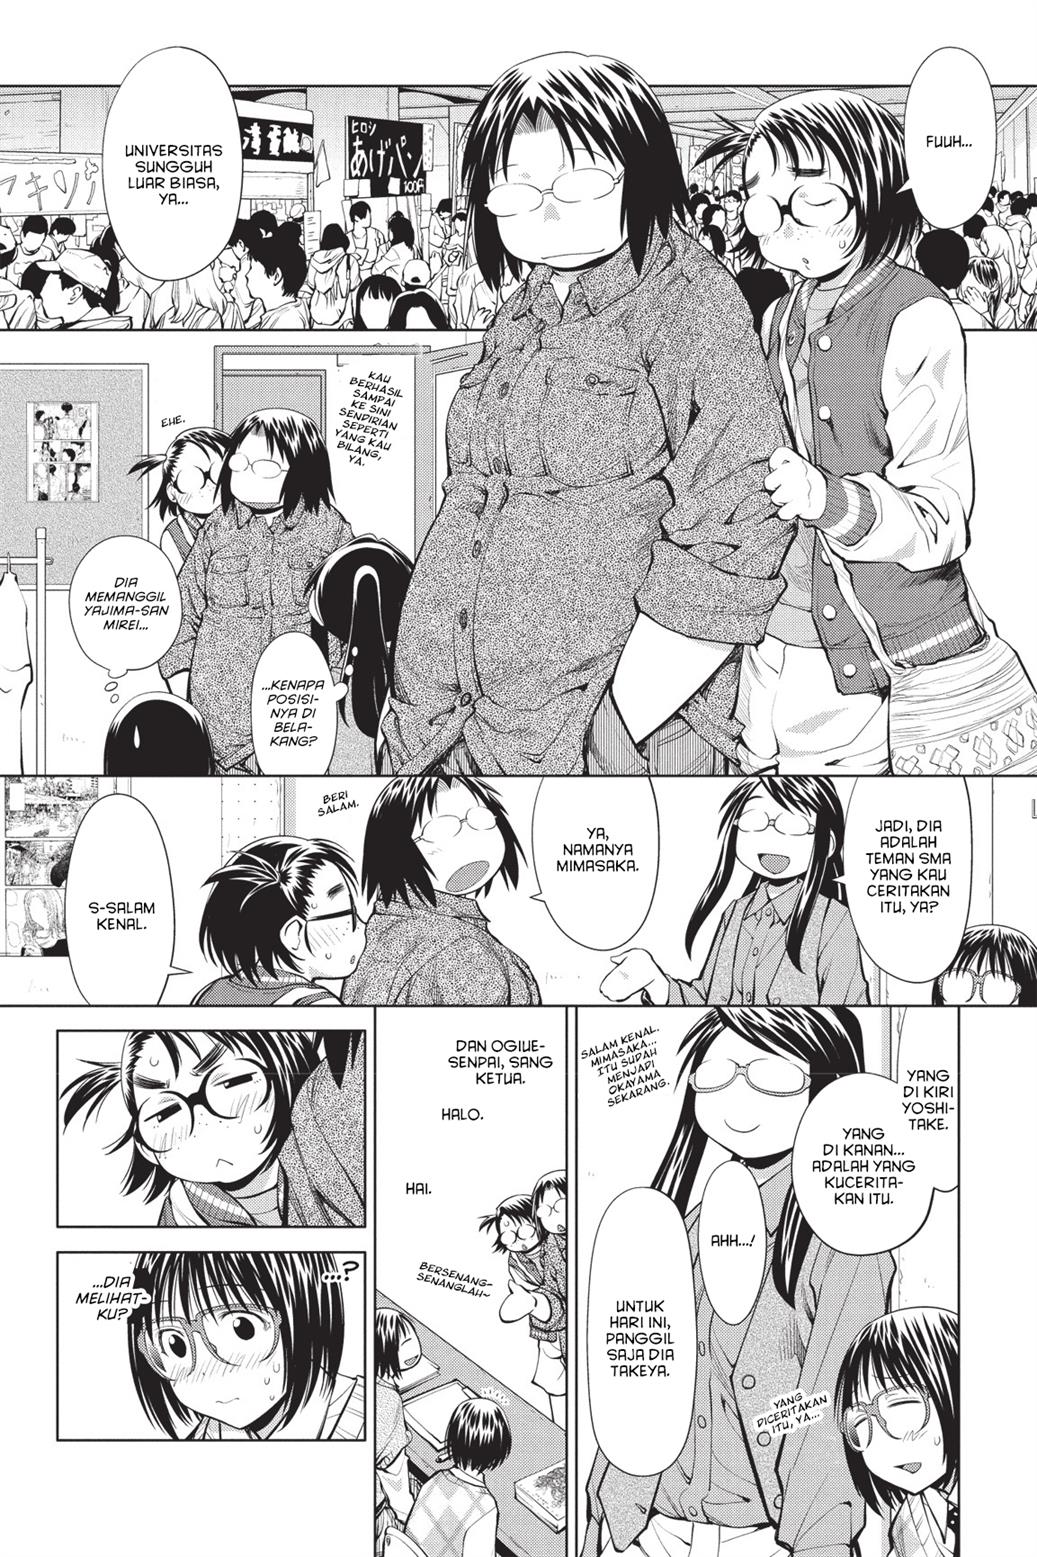 Genshiken – The Society for the Study of Modern Visual Culture Chapter 75 Image 4